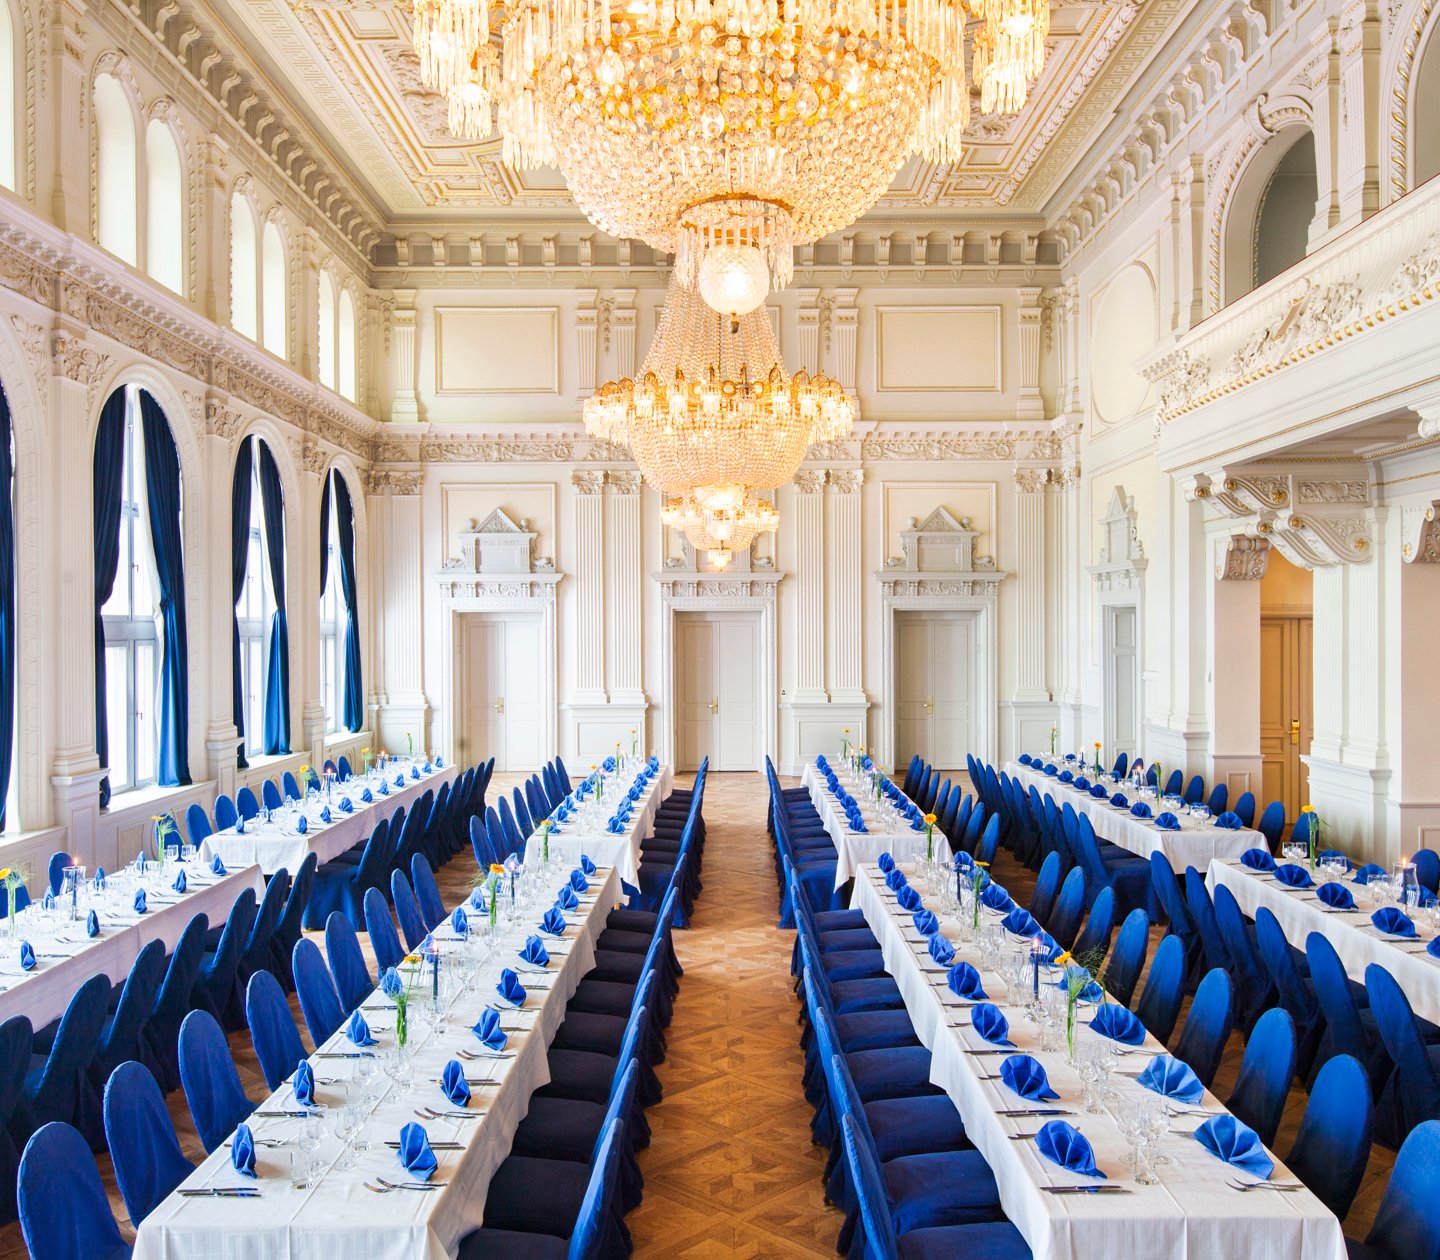 Fancy wedding hall with long tables with white tablecloths and blue chairs